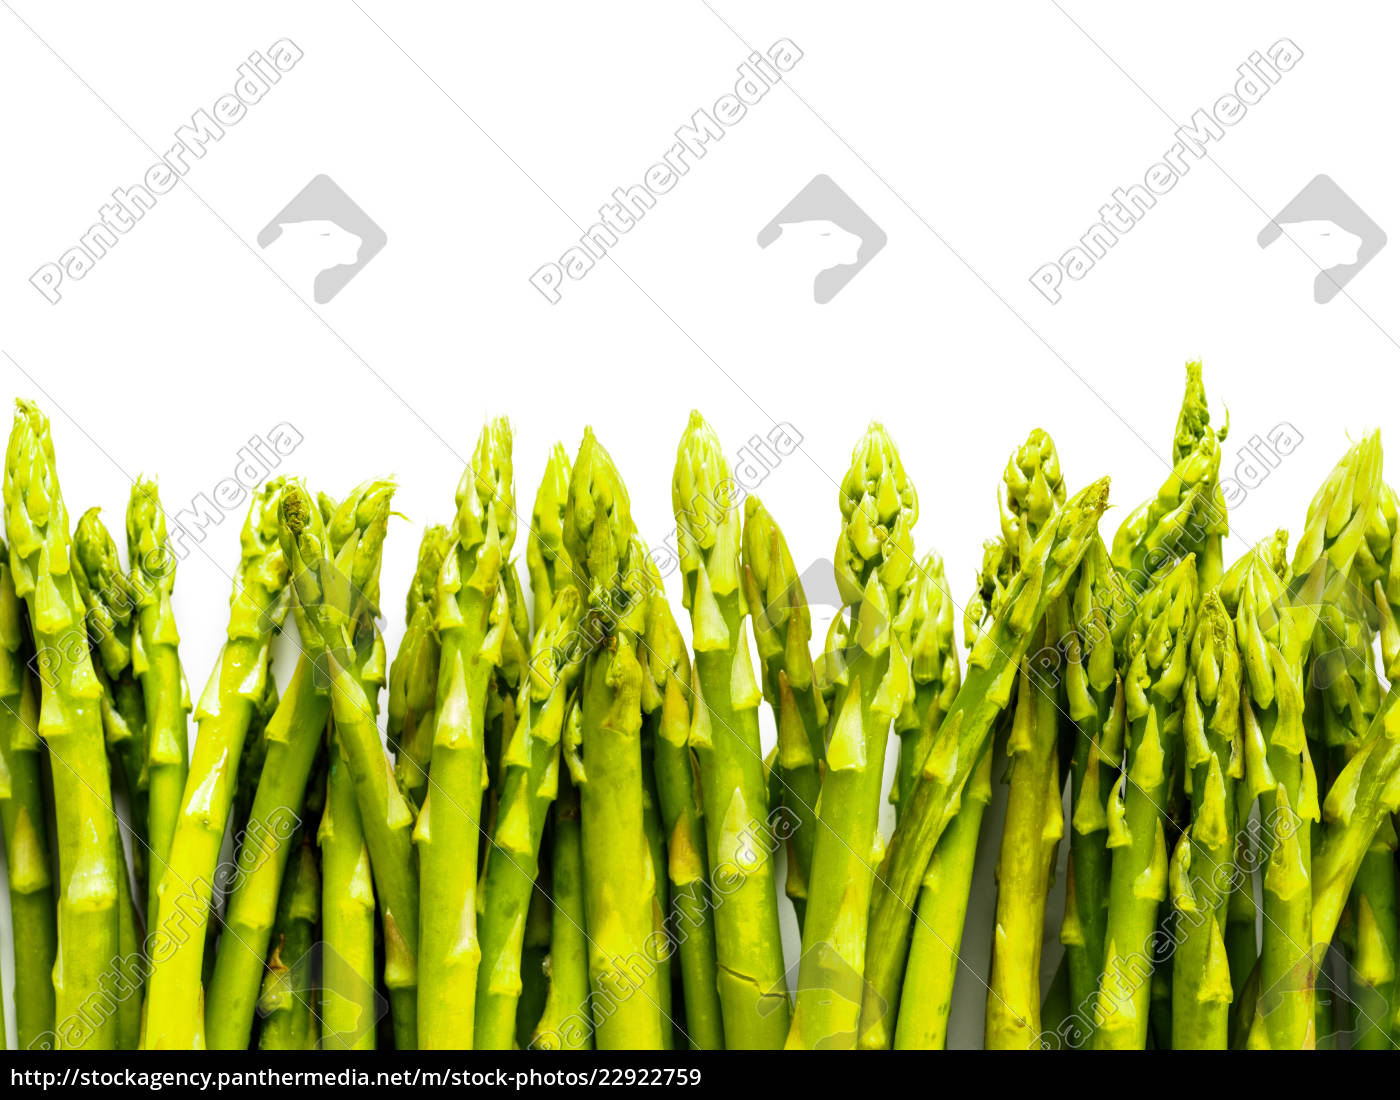 Fresh Green Asparagus Pattern Isolated On White Stock Photo 22922759 Panthermedia Stock Agency,Hooded Scarf Crochet Pattern